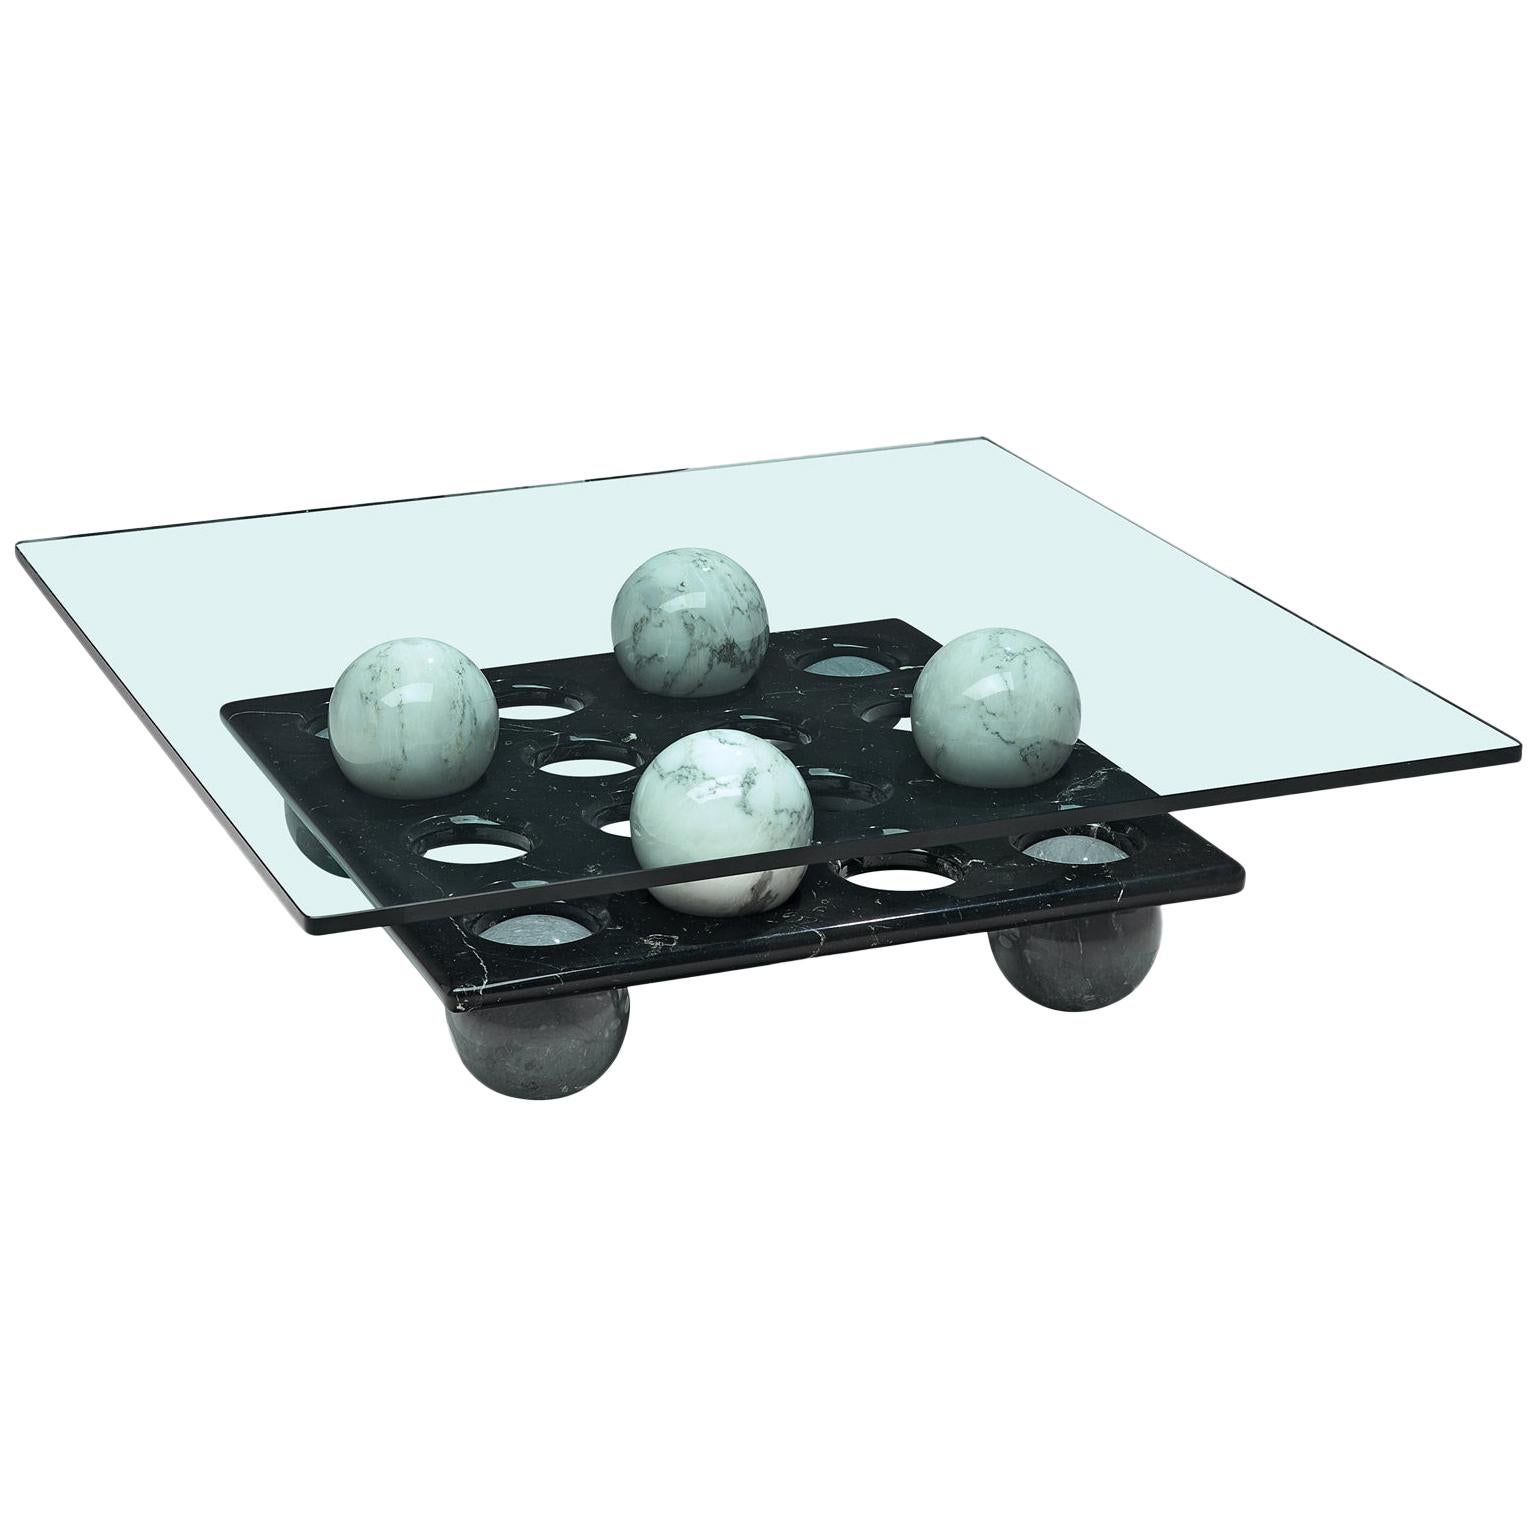 Italian Playful Coffee Table in Glass and Marble